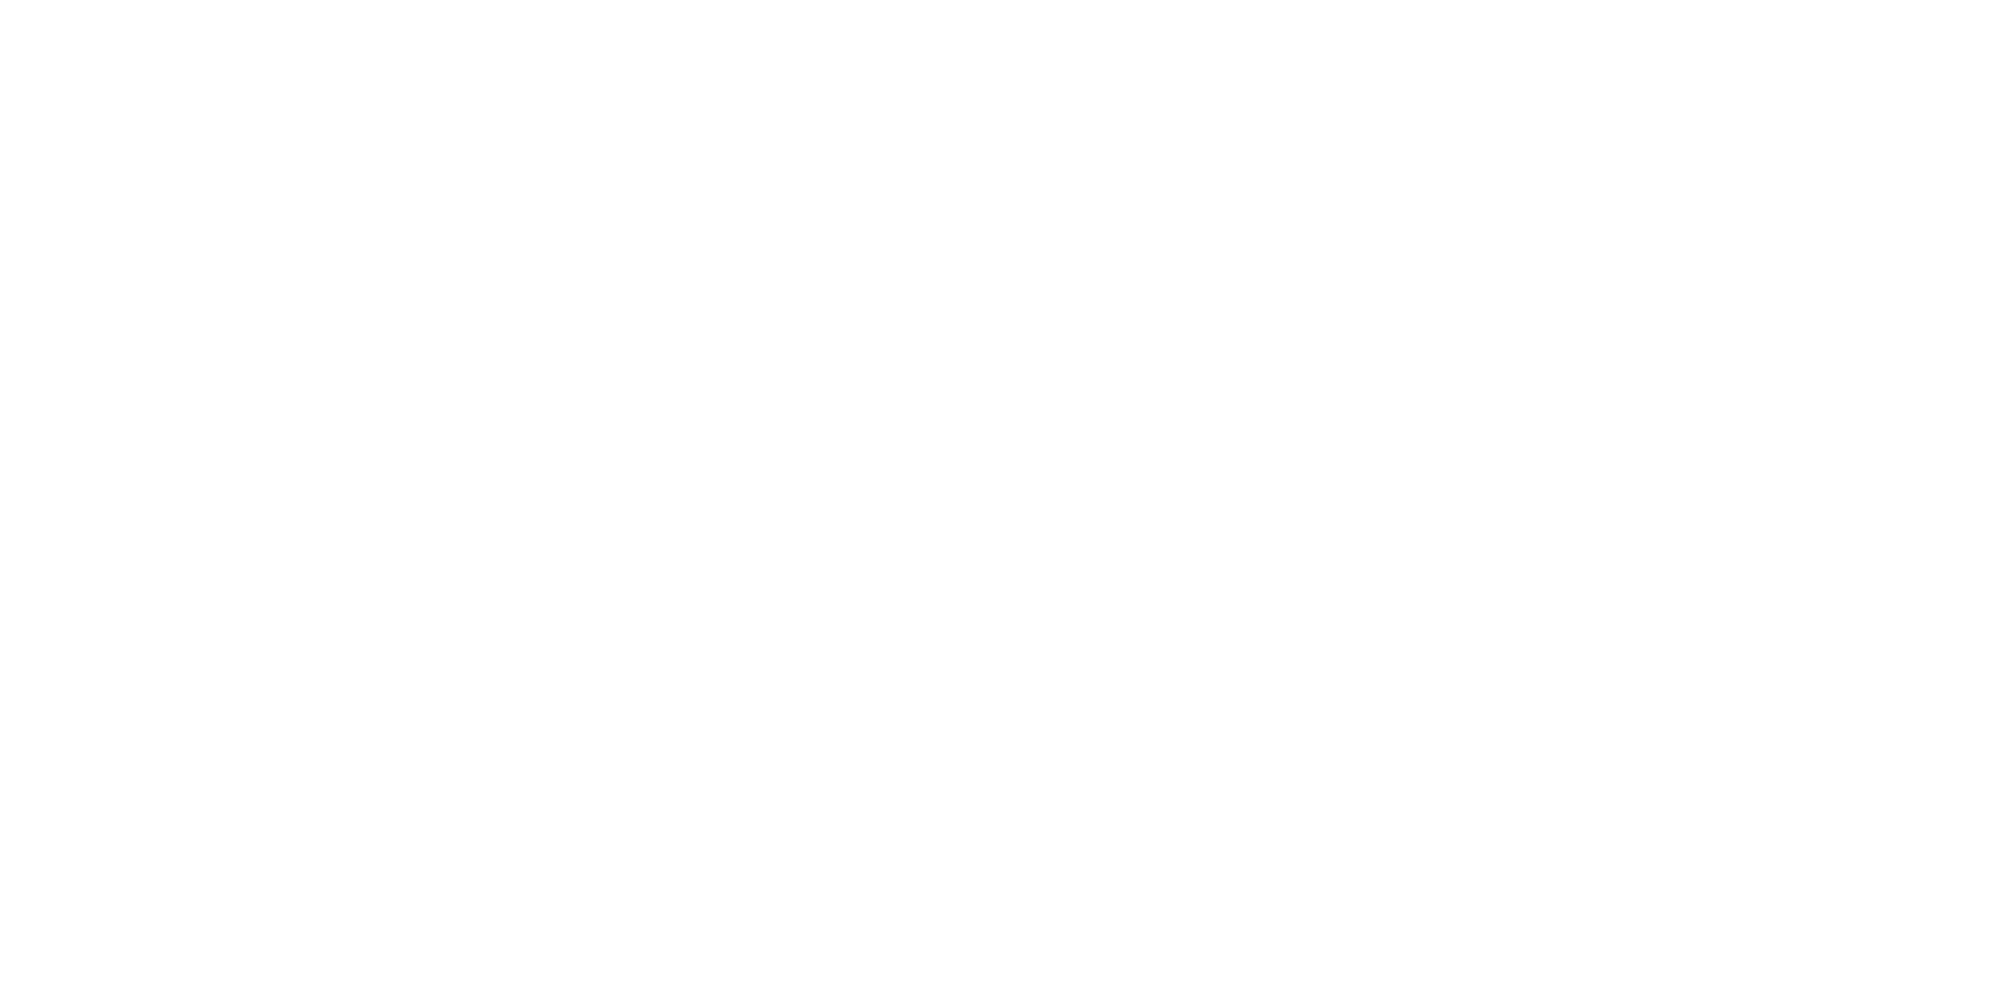 Outer Collection 2023winter